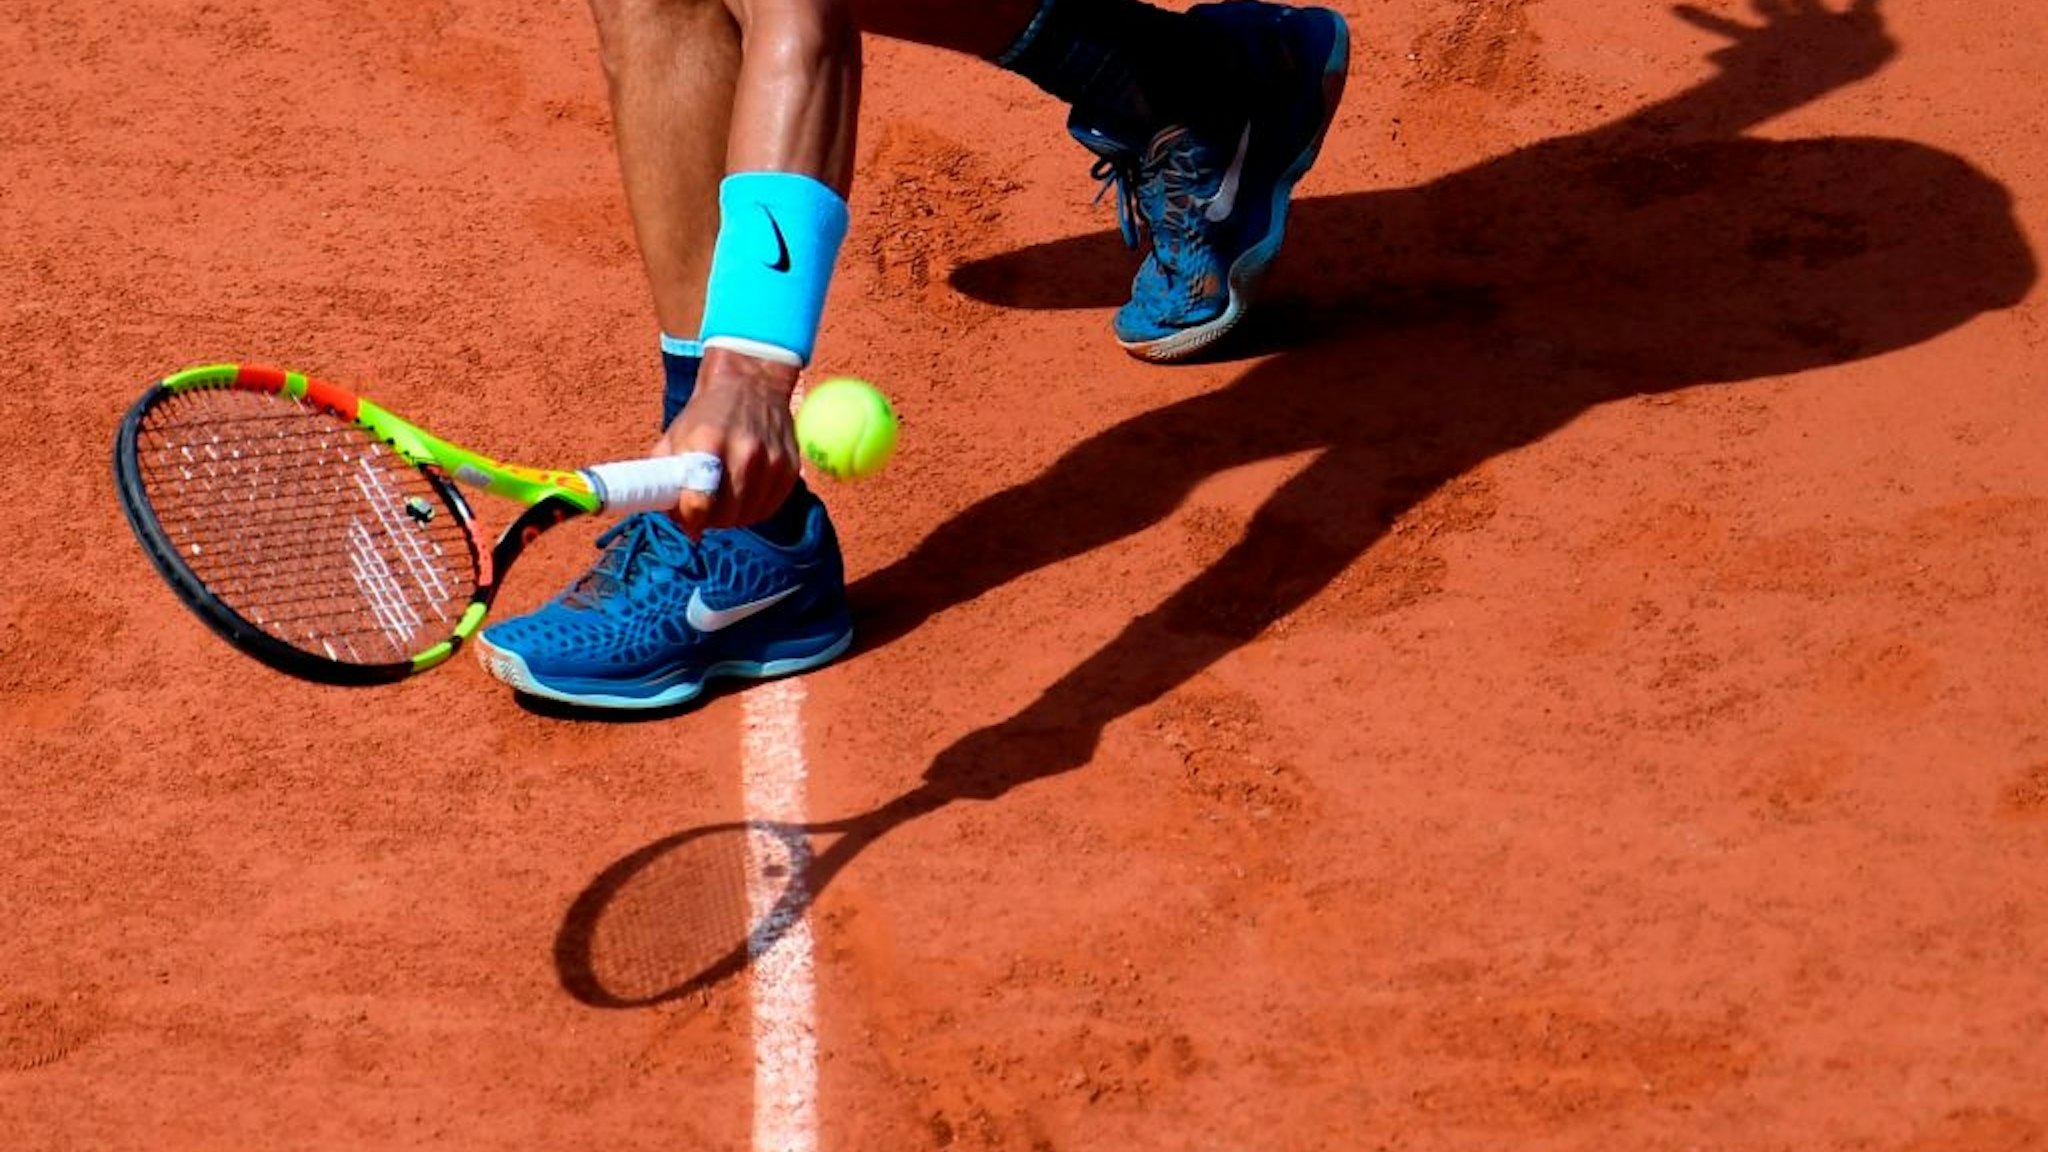 Spain's Rafael Nadal casts a shadow on court as he plays a backhand return to Argentina's Juan Martin del Potro during their men's singles semi-final match on day thirteen of The Roland Garros 2018 French Open tennis tournament in Paris on June 8, 2018. (Photo by CHRISTOPHE SIMON / AFP) (Photo credit should read CHRISTOPHE SIMON/AFP via Getty Images)